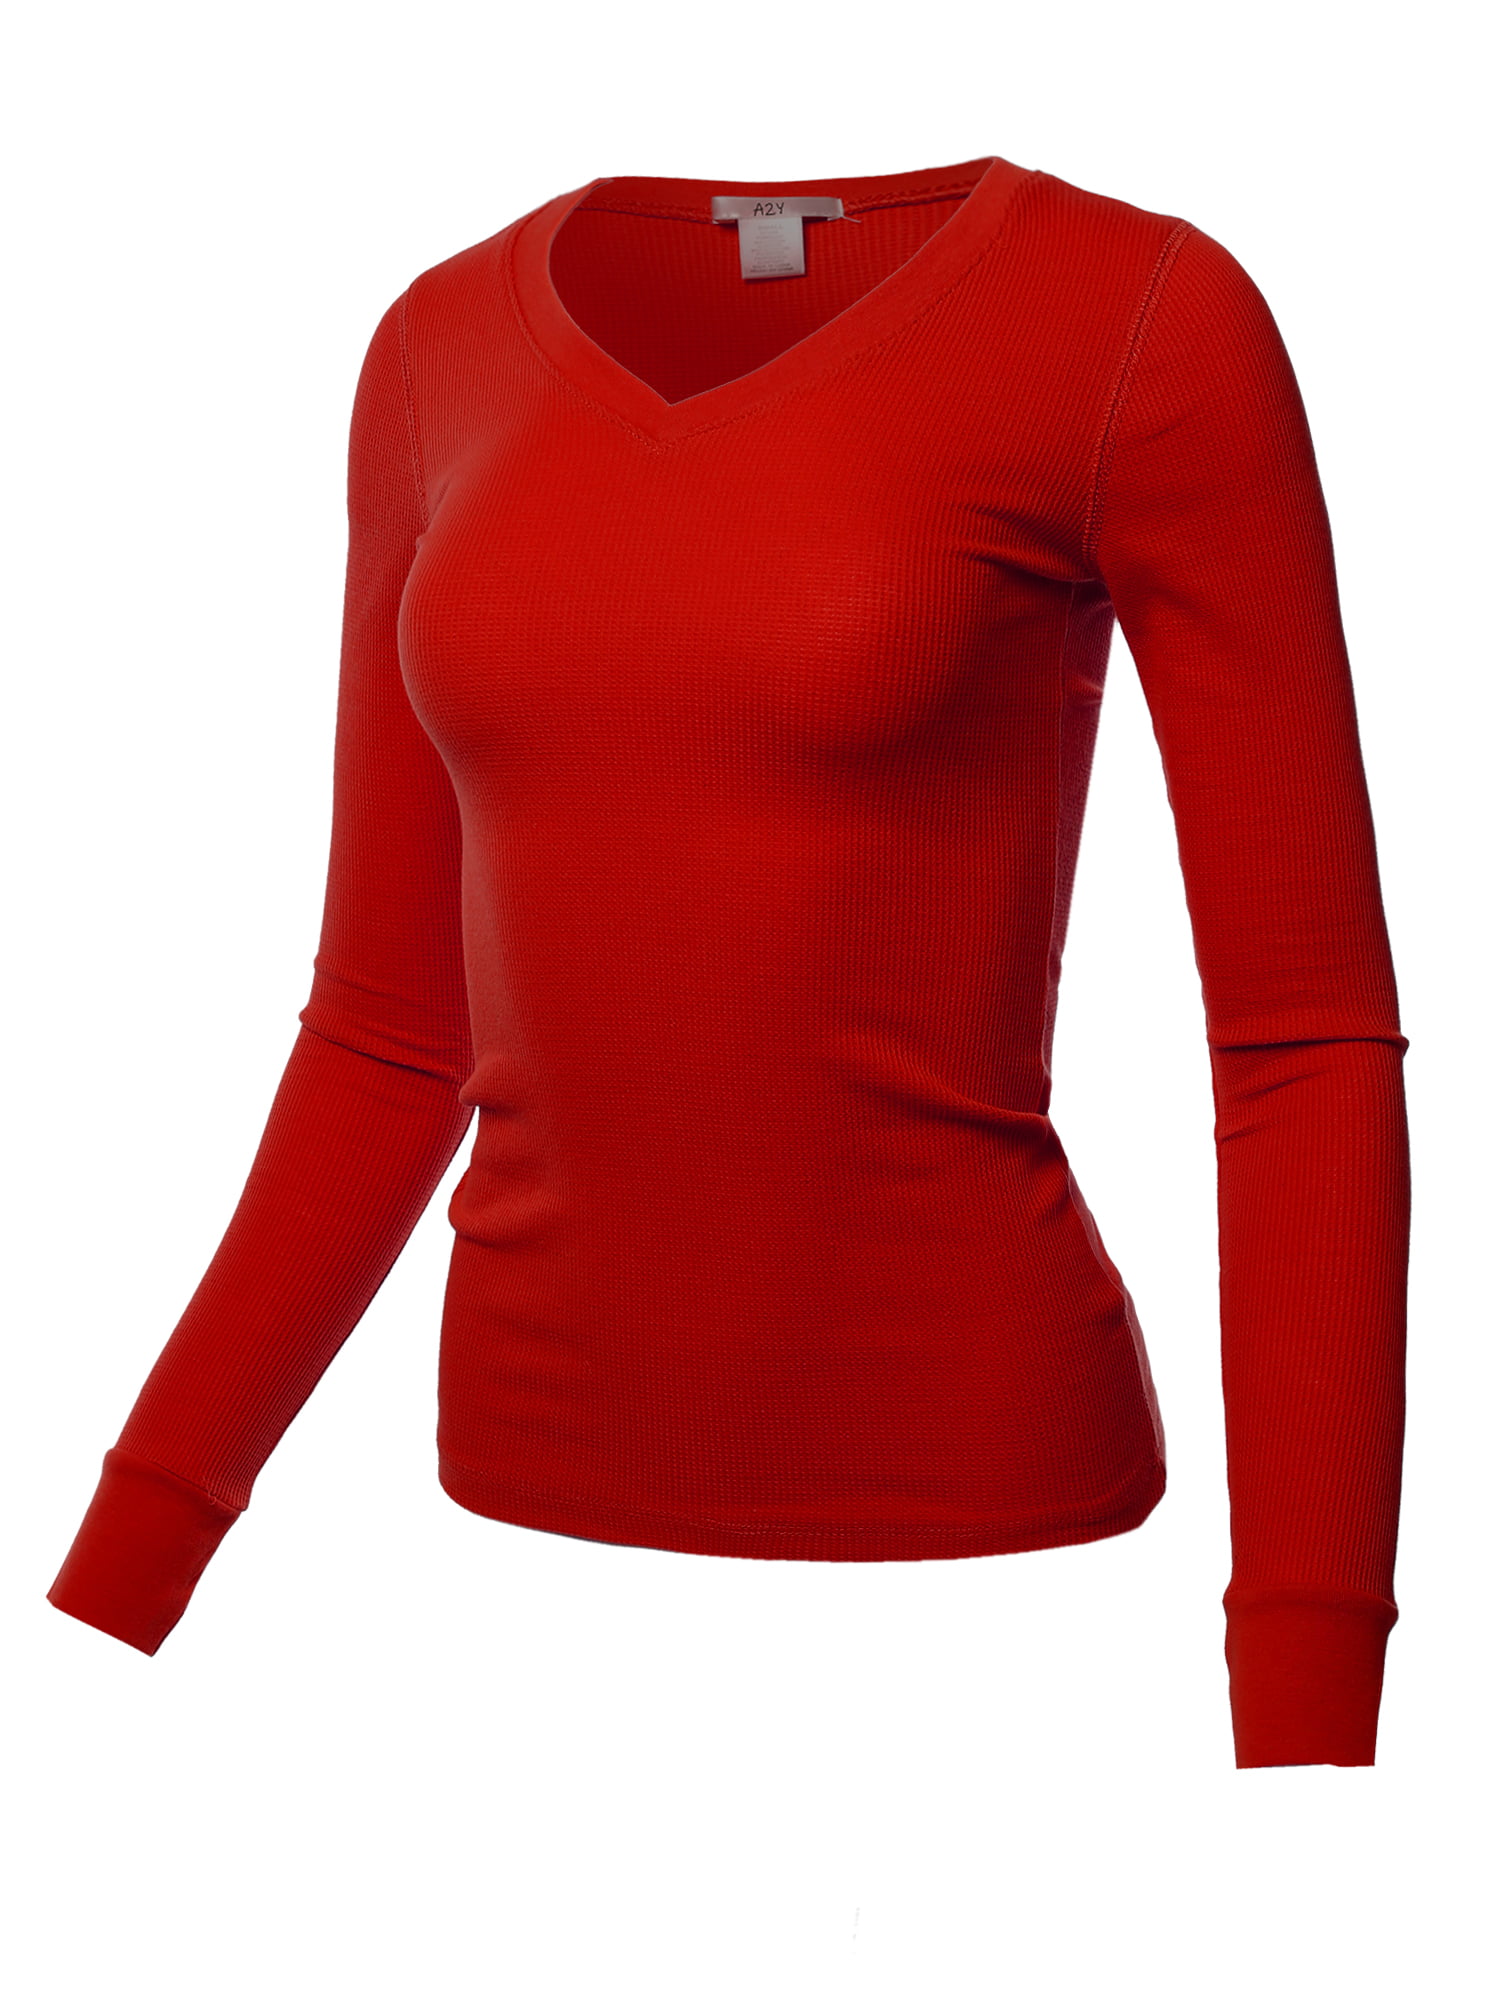 Thermal Solid Long Sleeve 3XL Red Scarlet Fitted Basic Shirt Women\'s V-Neck Top A2Y